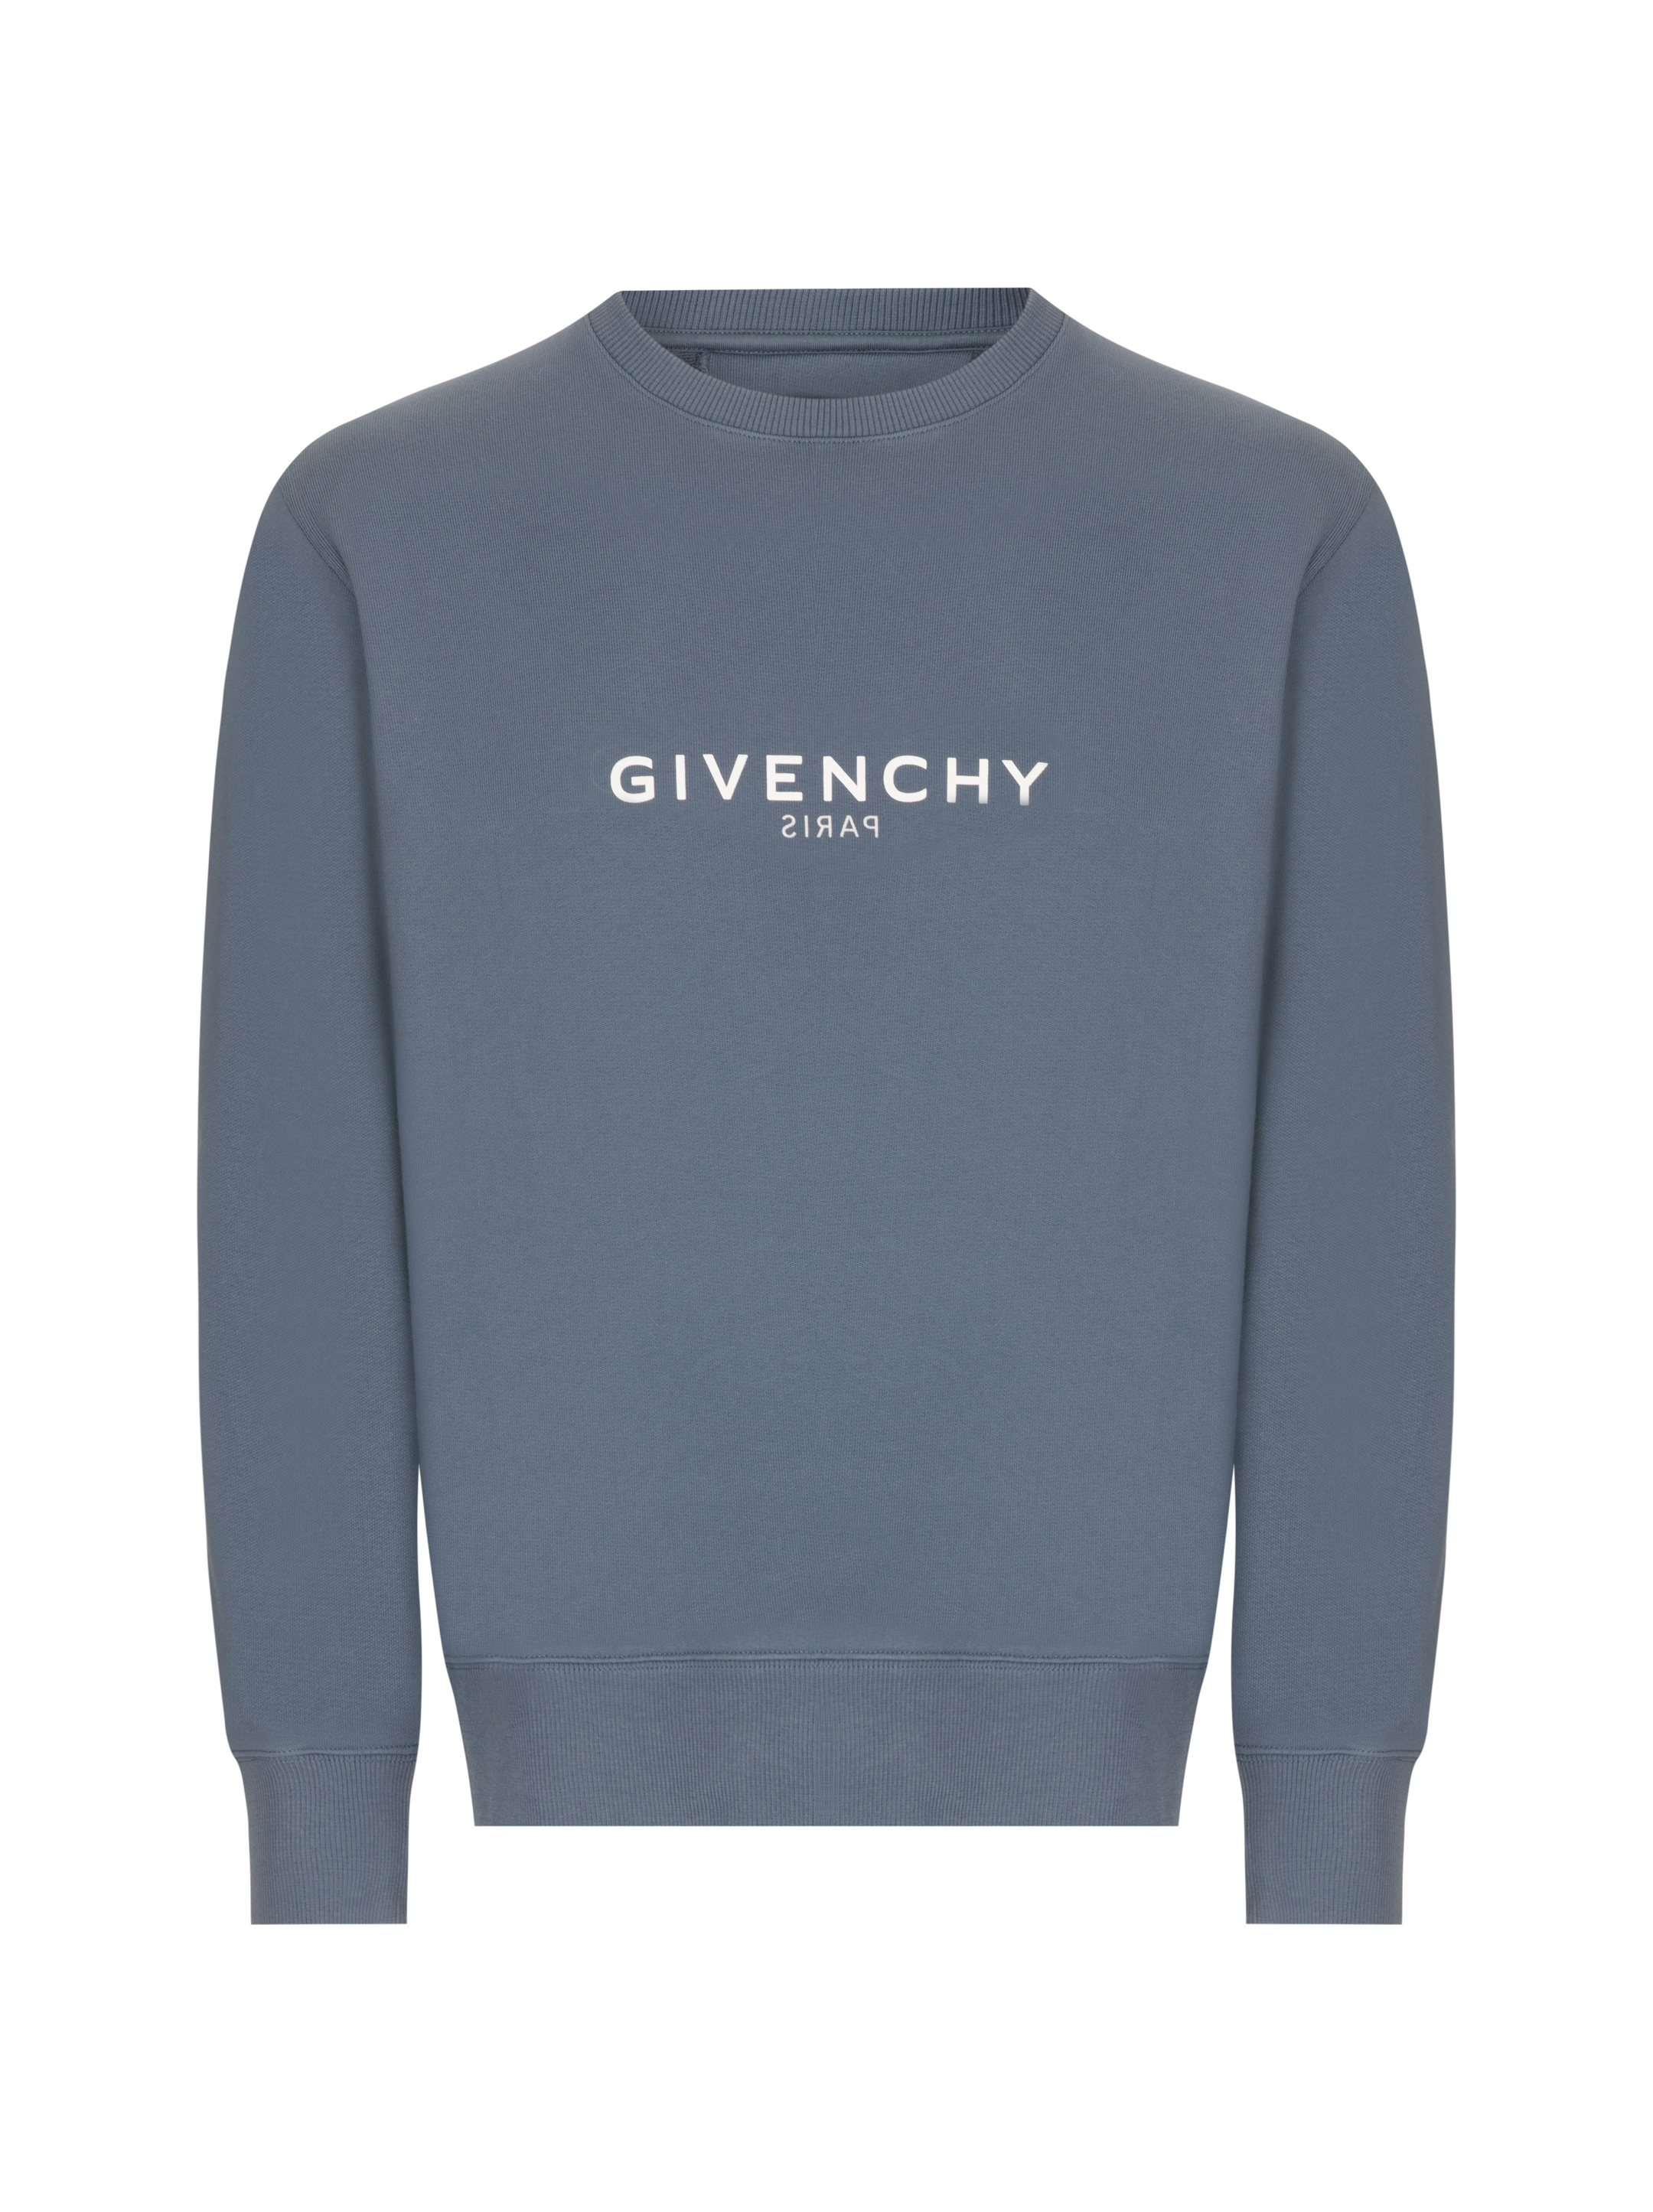 Givenchy Baby Blue Distressed Logo Sweater